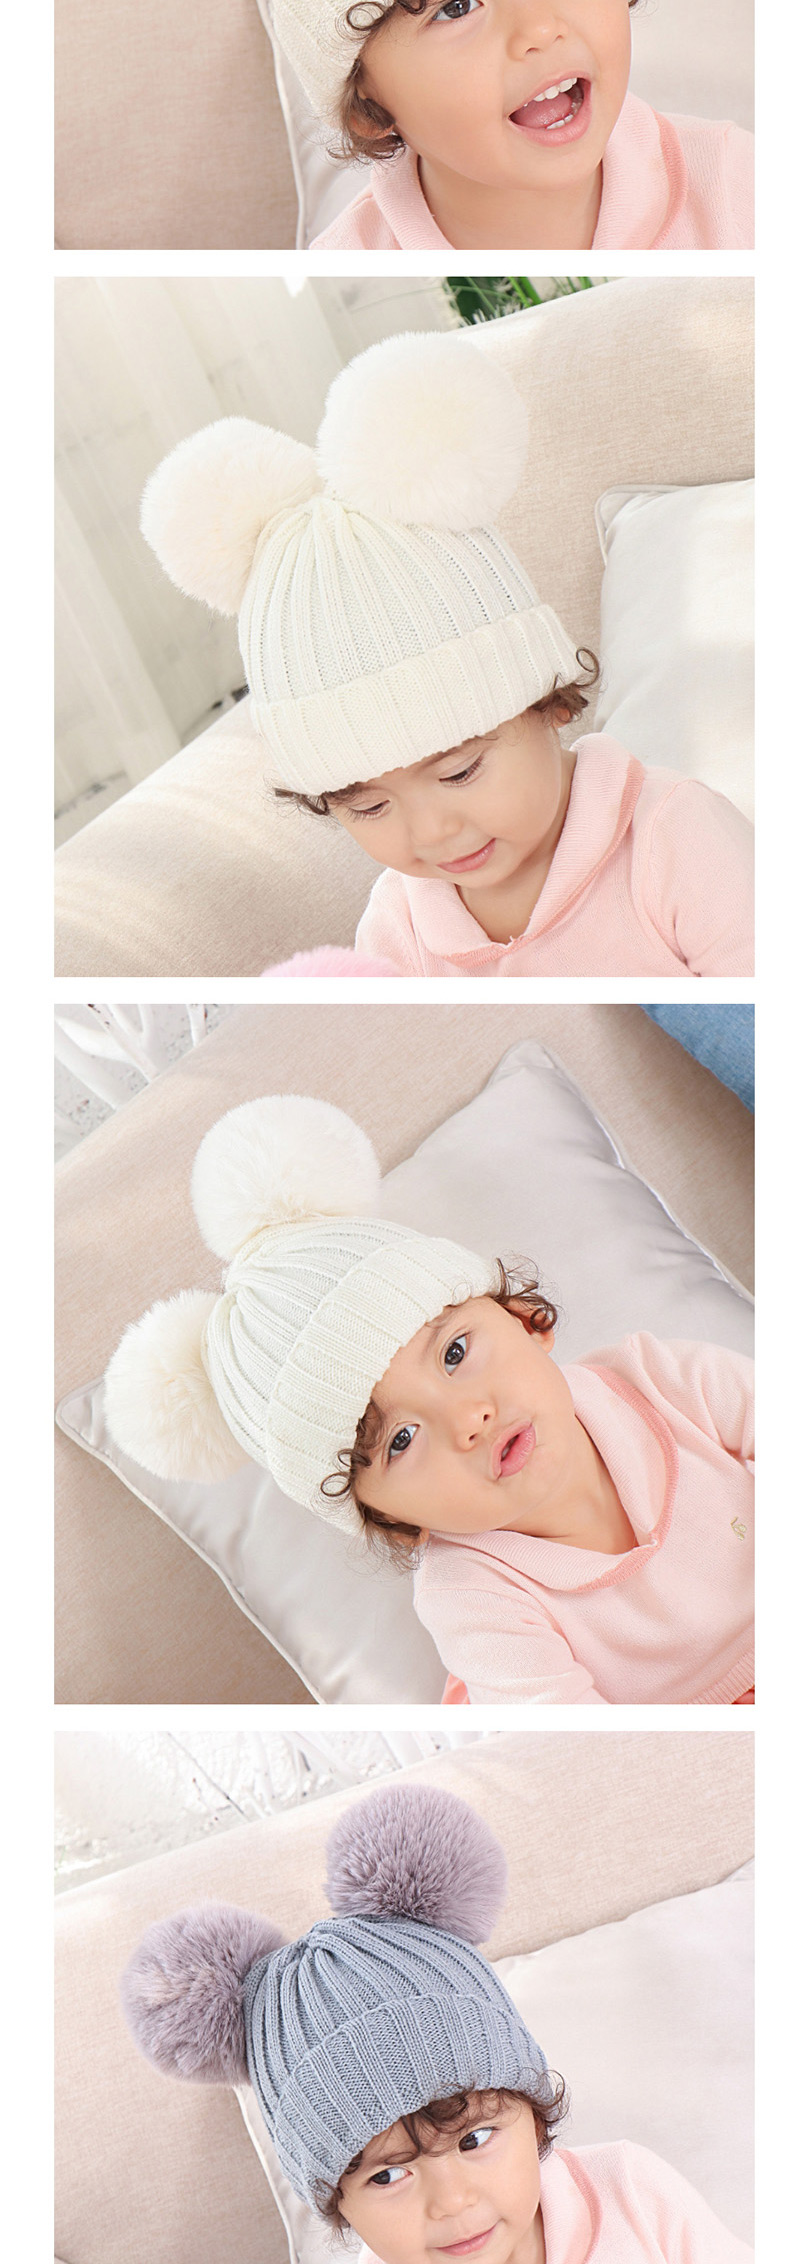 Fashion White Threaded Double-hair Ball Knitted Baby Hat,Children